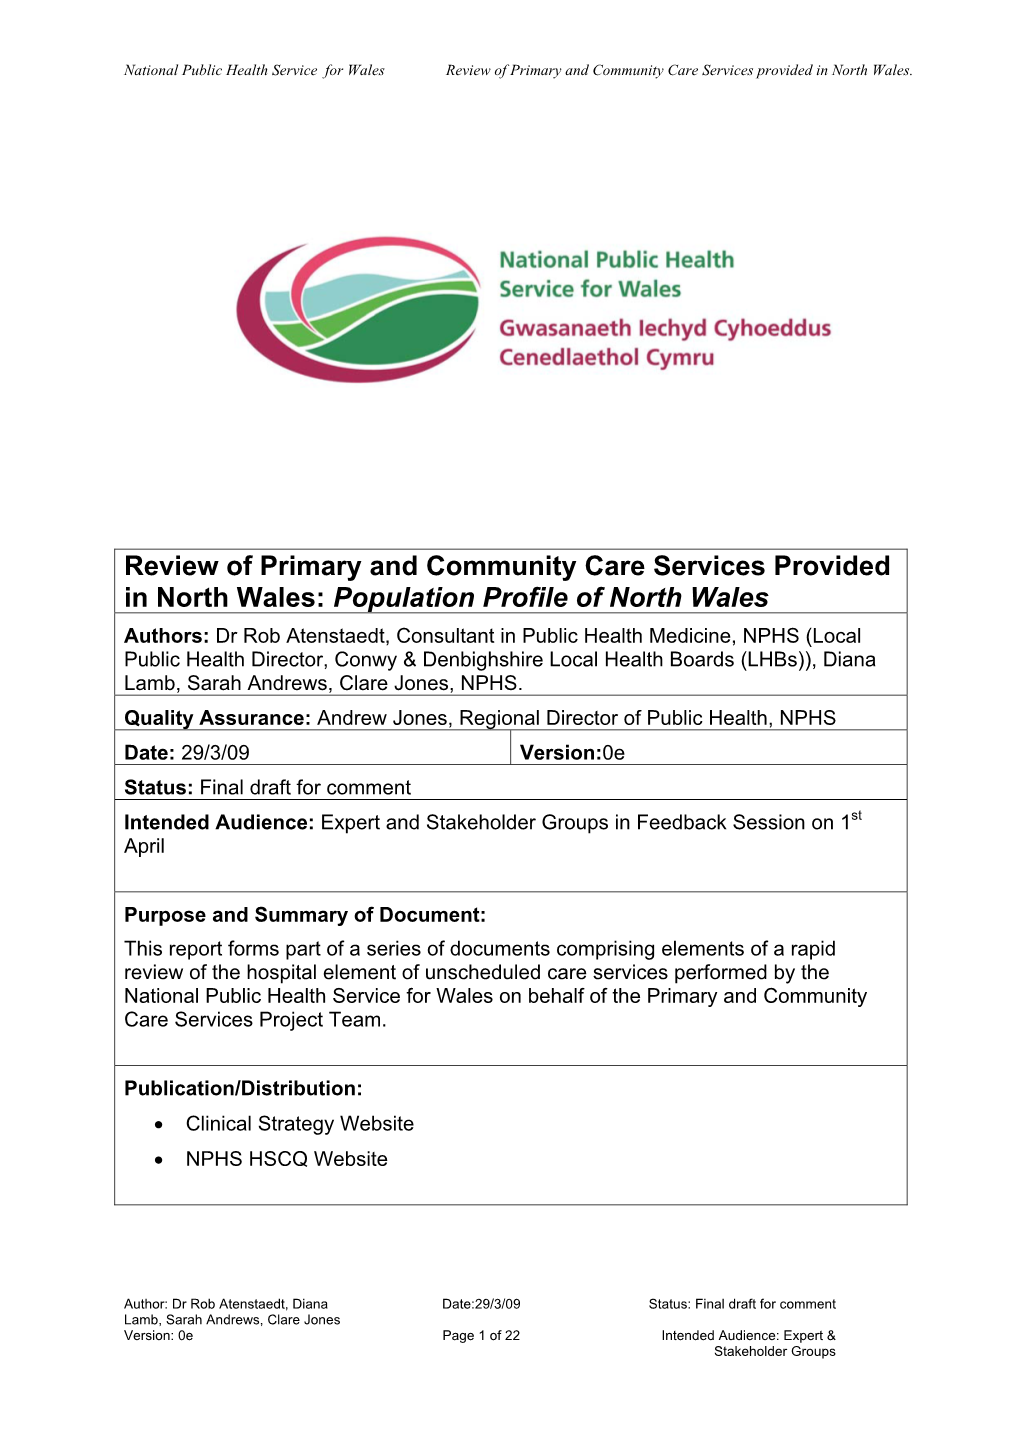 Review of Primary and Community Care Services Provided in North Wales